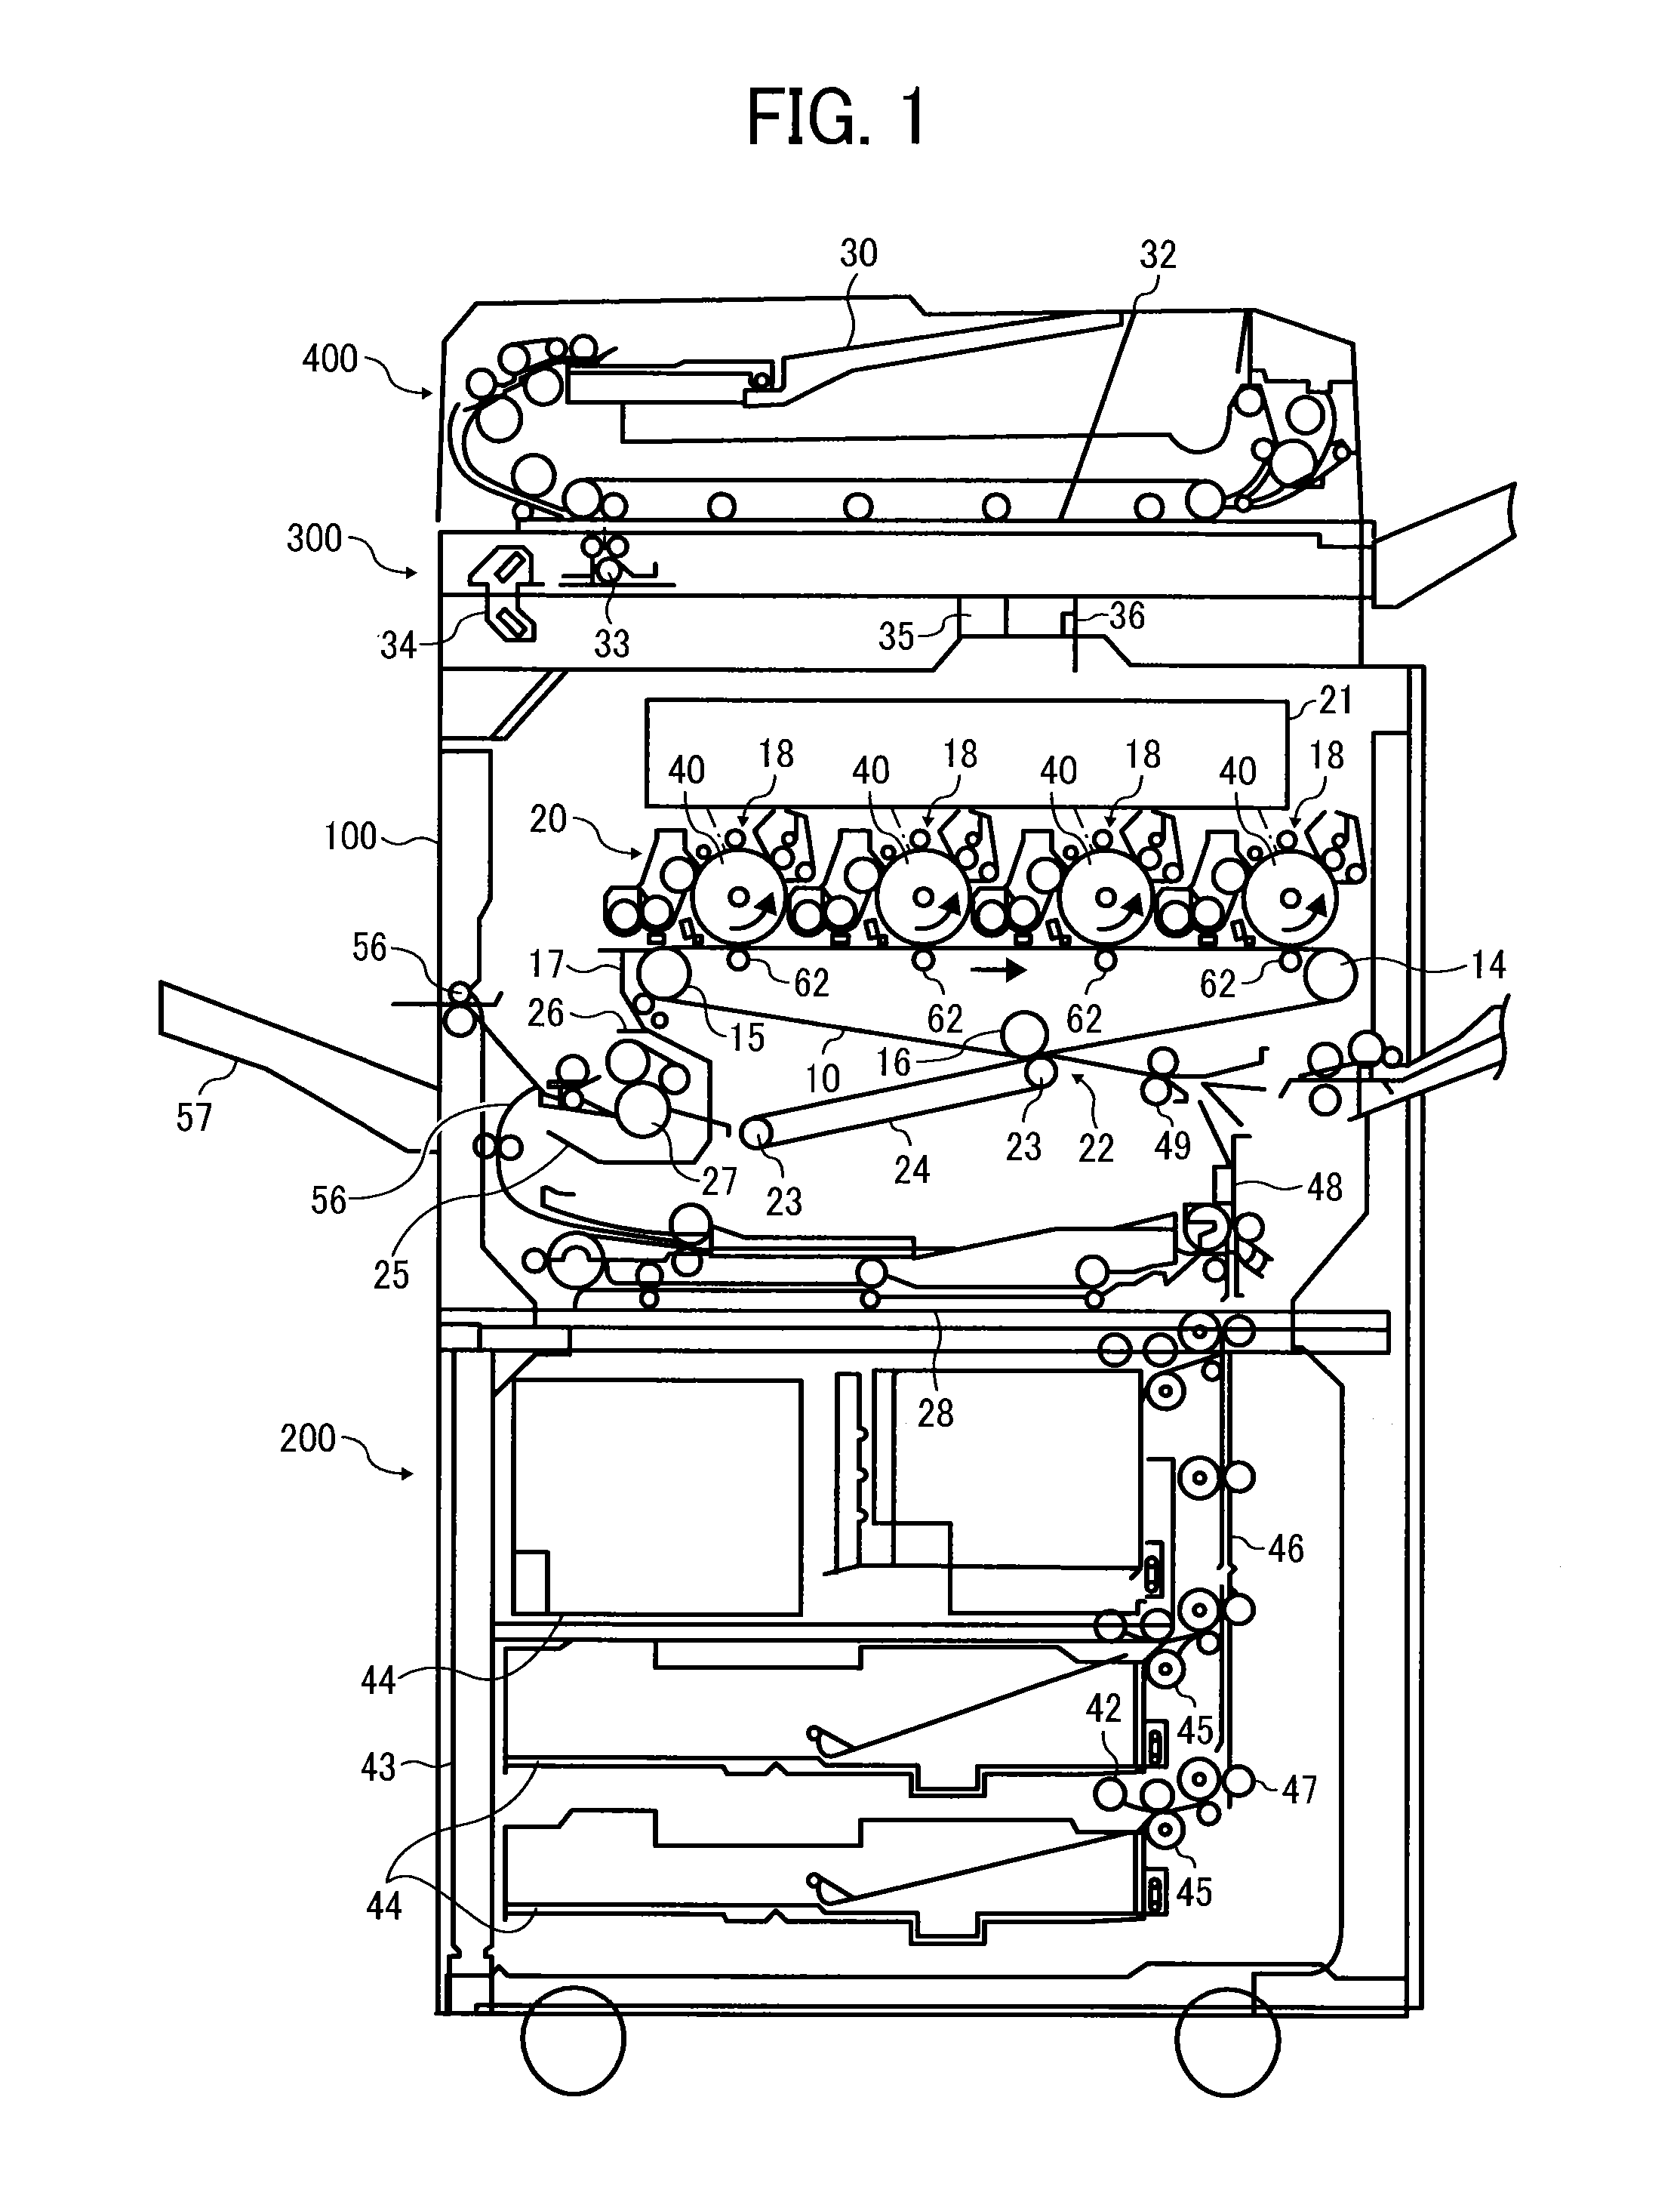 Toner, development agent, image forming apparatus, and image forming method